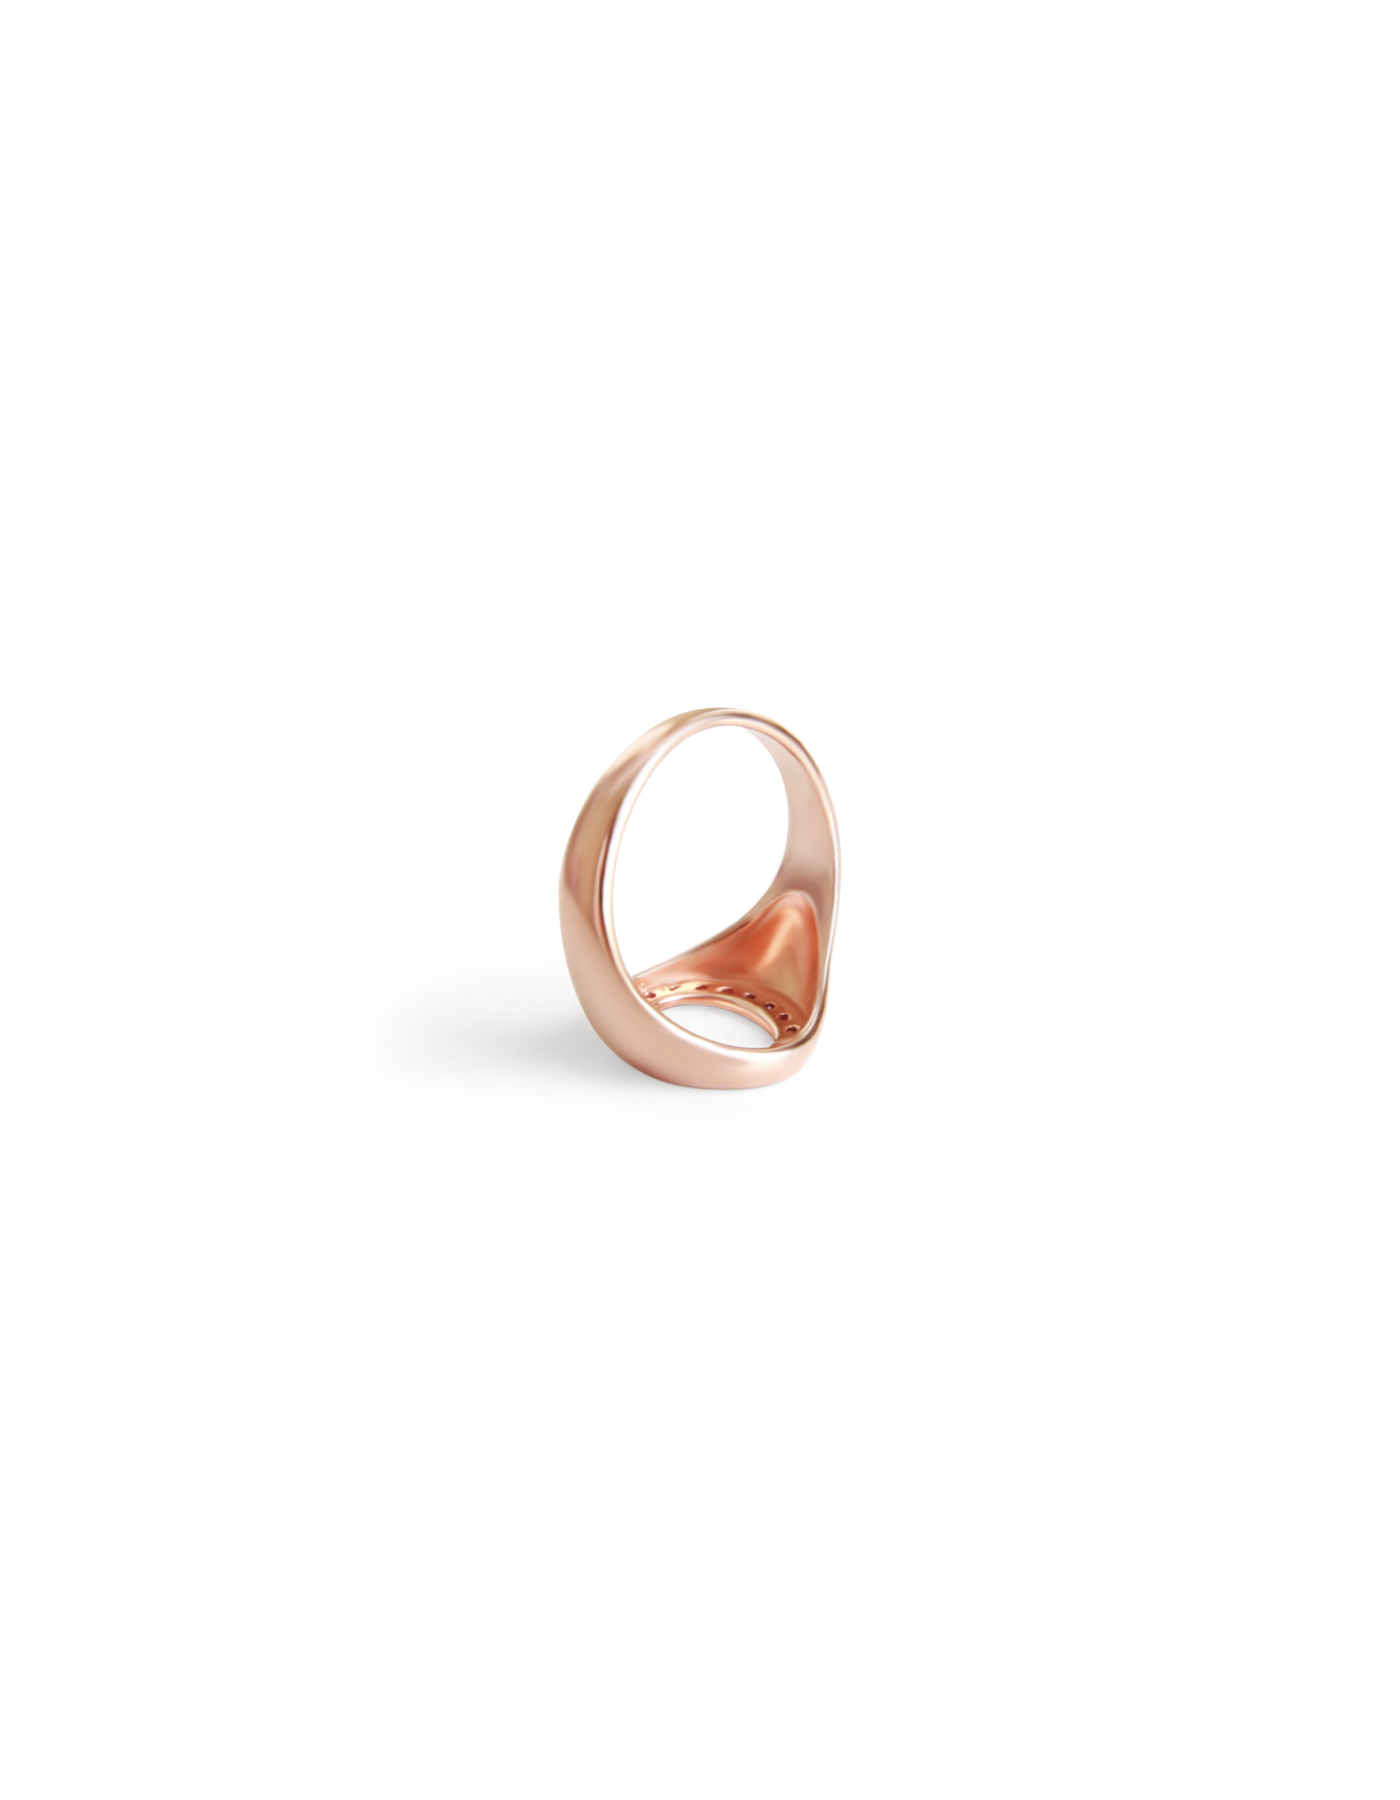 LY Ring (Ruby)